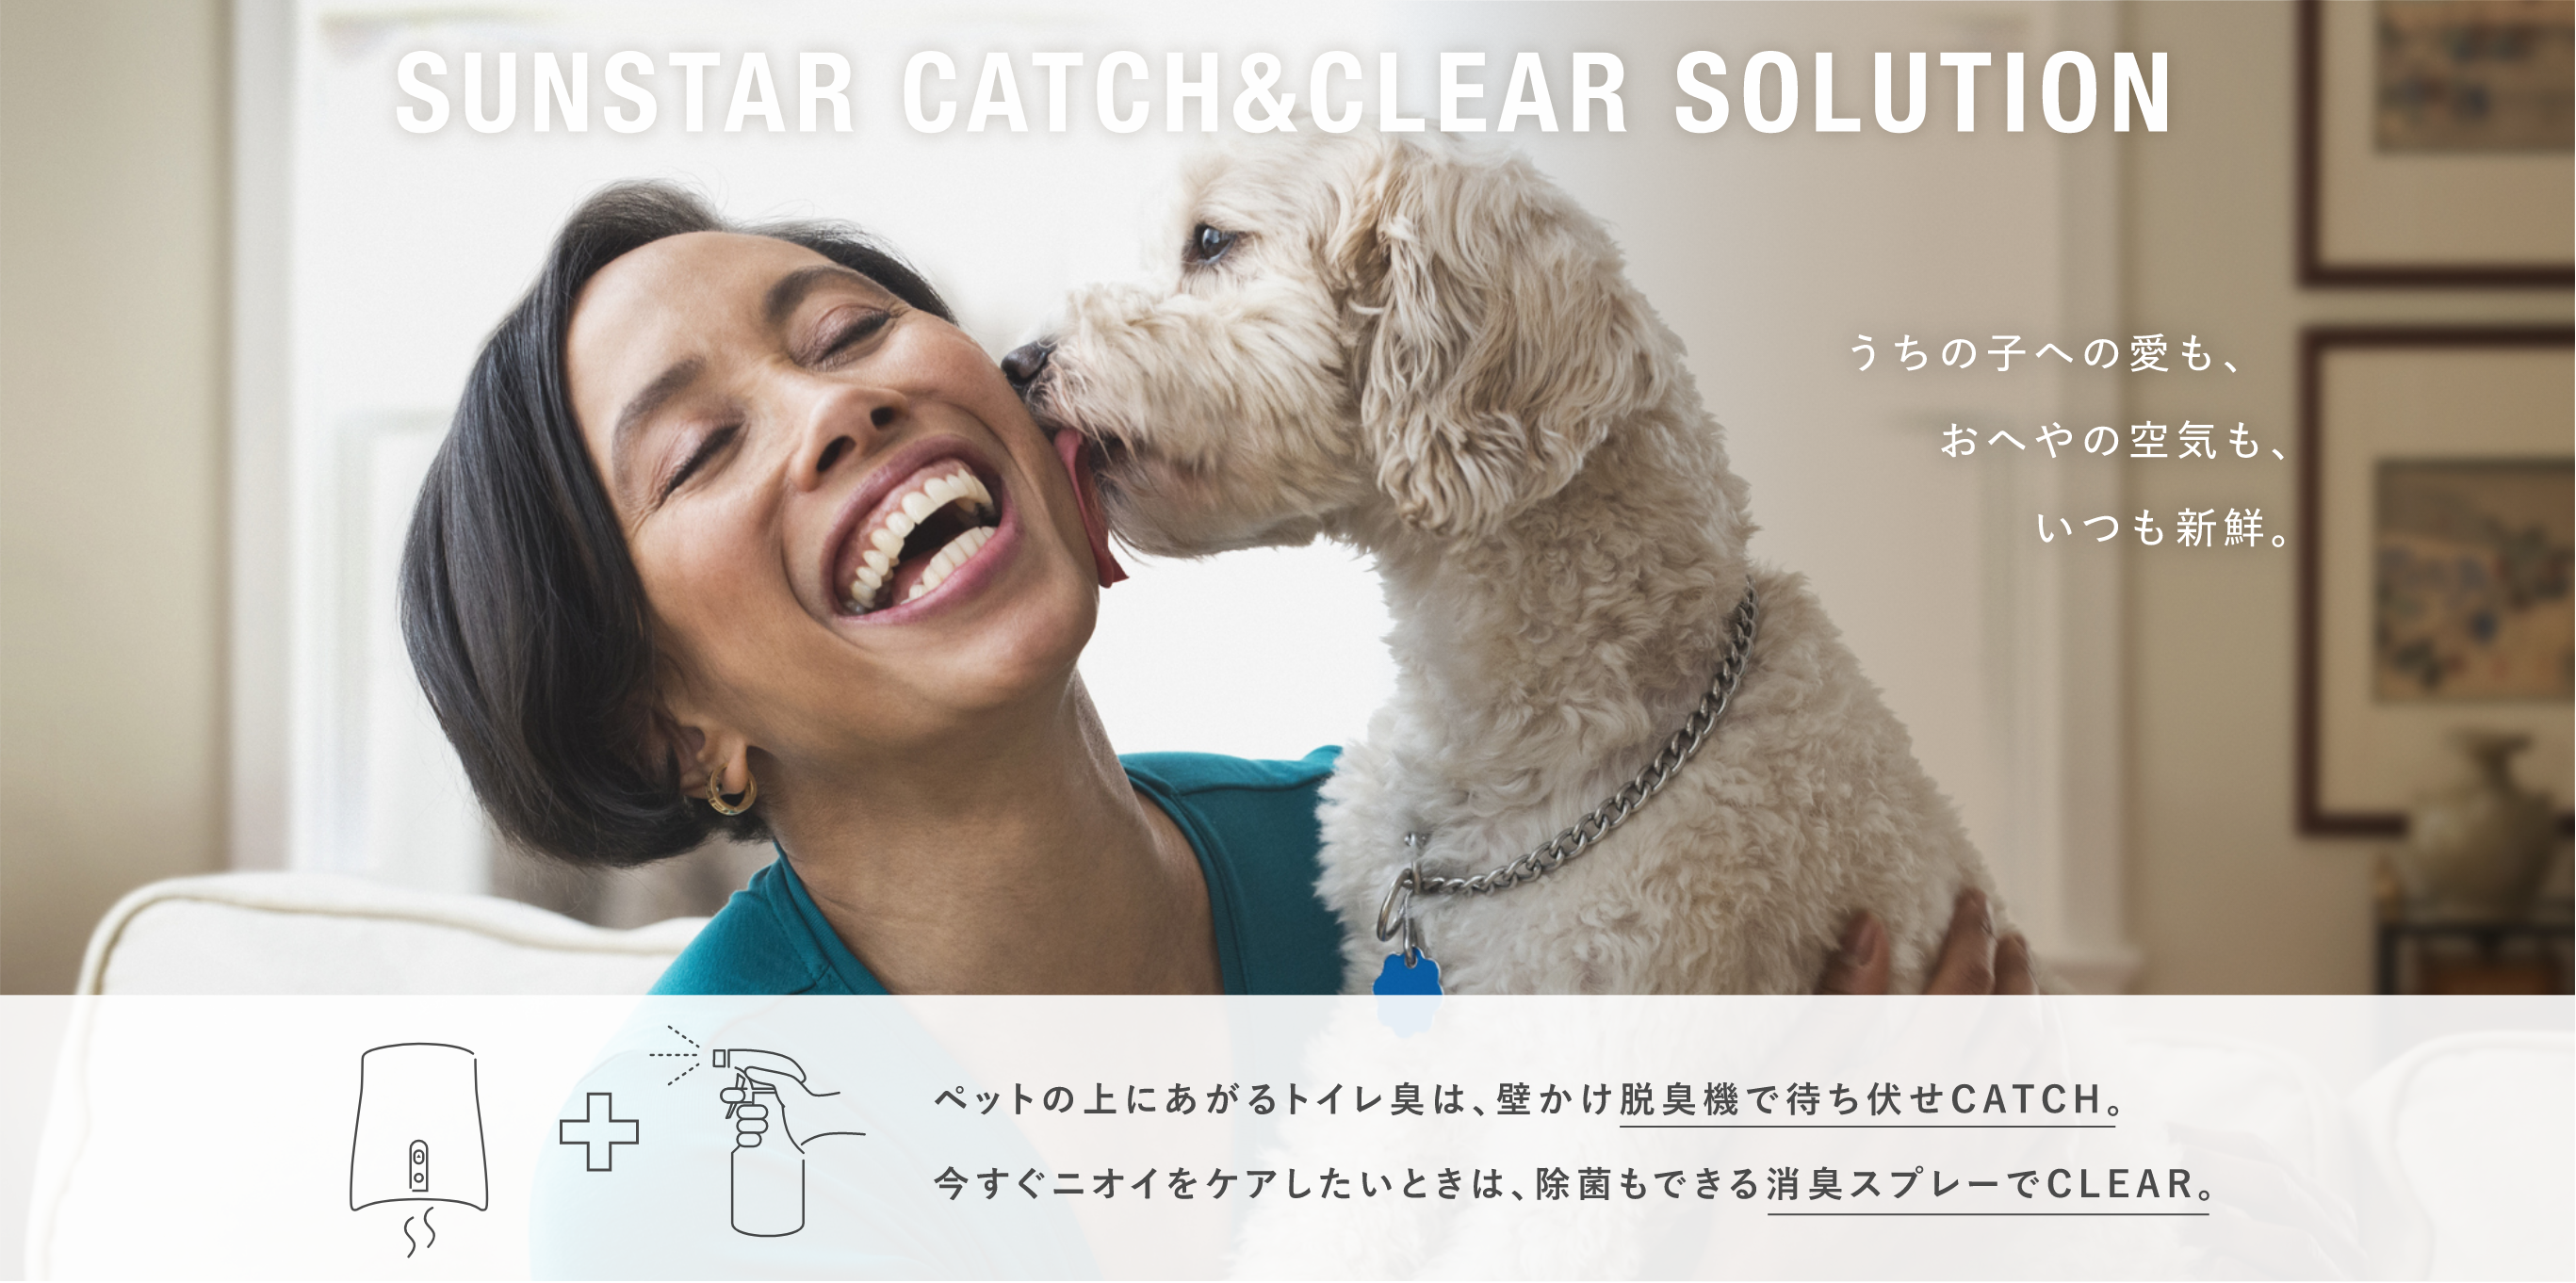 SUNSTAR CATCH & CLEAR SOLUTION